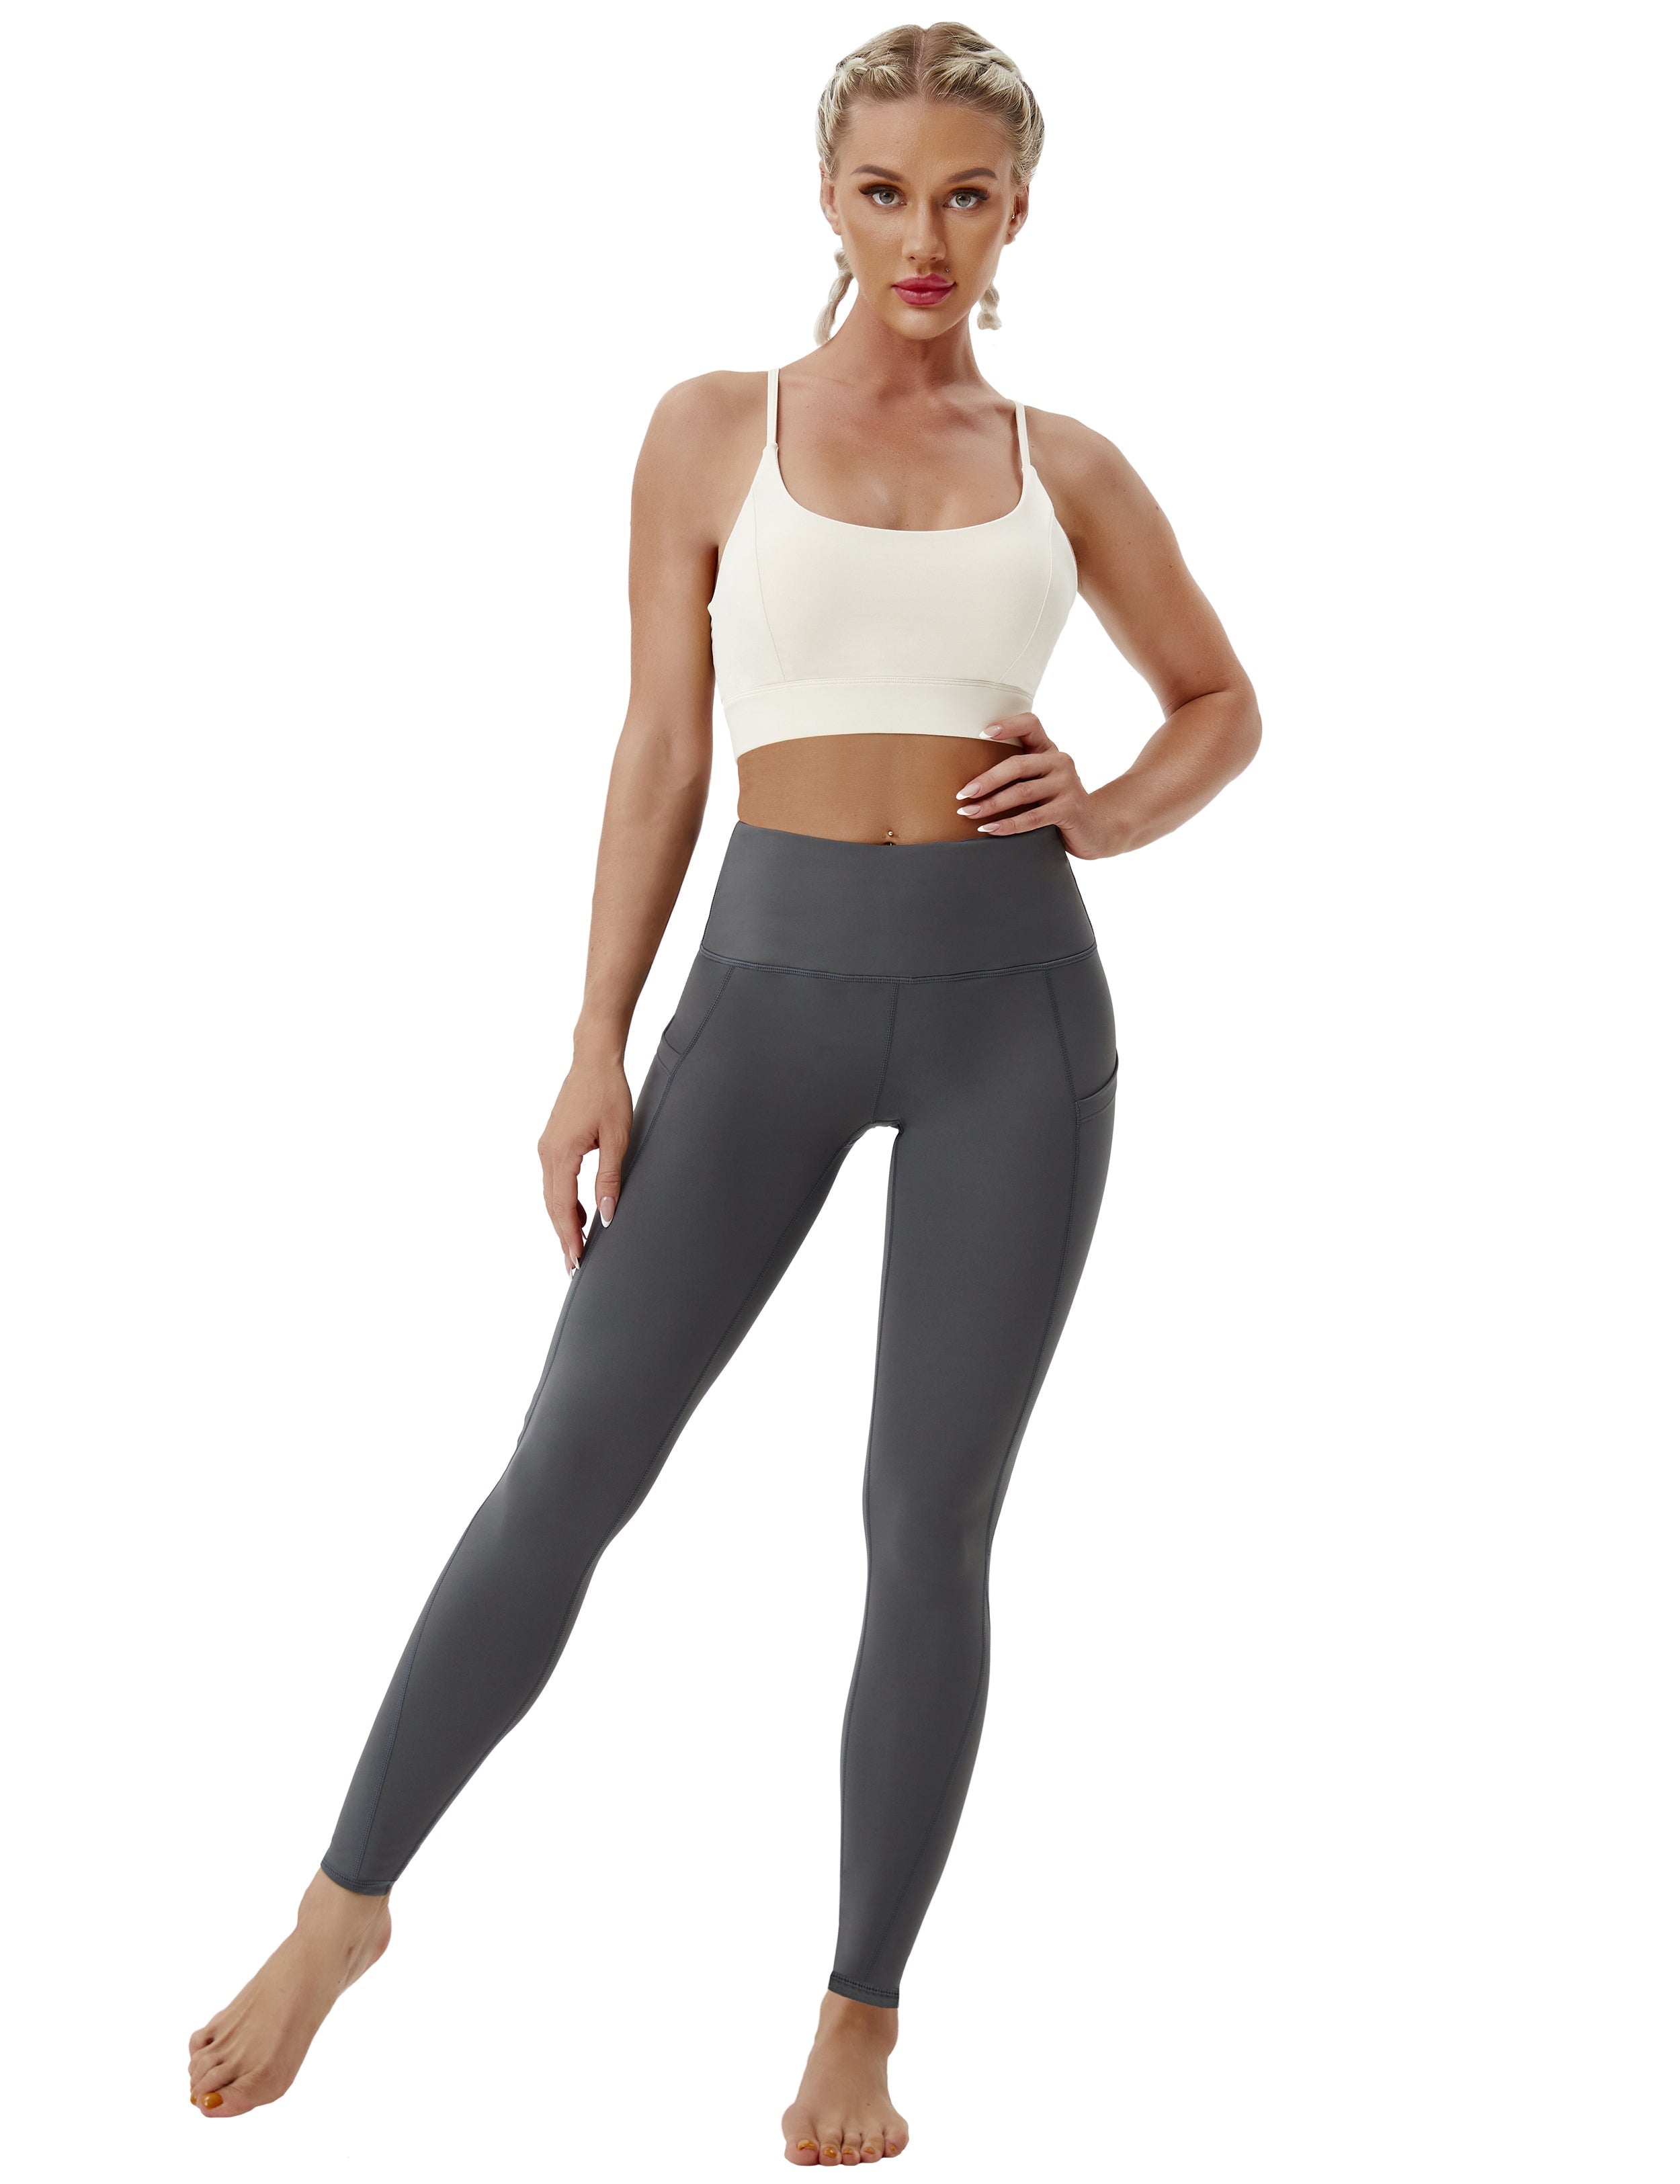 High Waist Side Pockets Tall Size Pants shadowcharcoal 75% Nylon, 25% Spandex Fabric doesn't attract lint easily 4-way stretch No see-through Moisture-wicking Tummy control Inner pocket